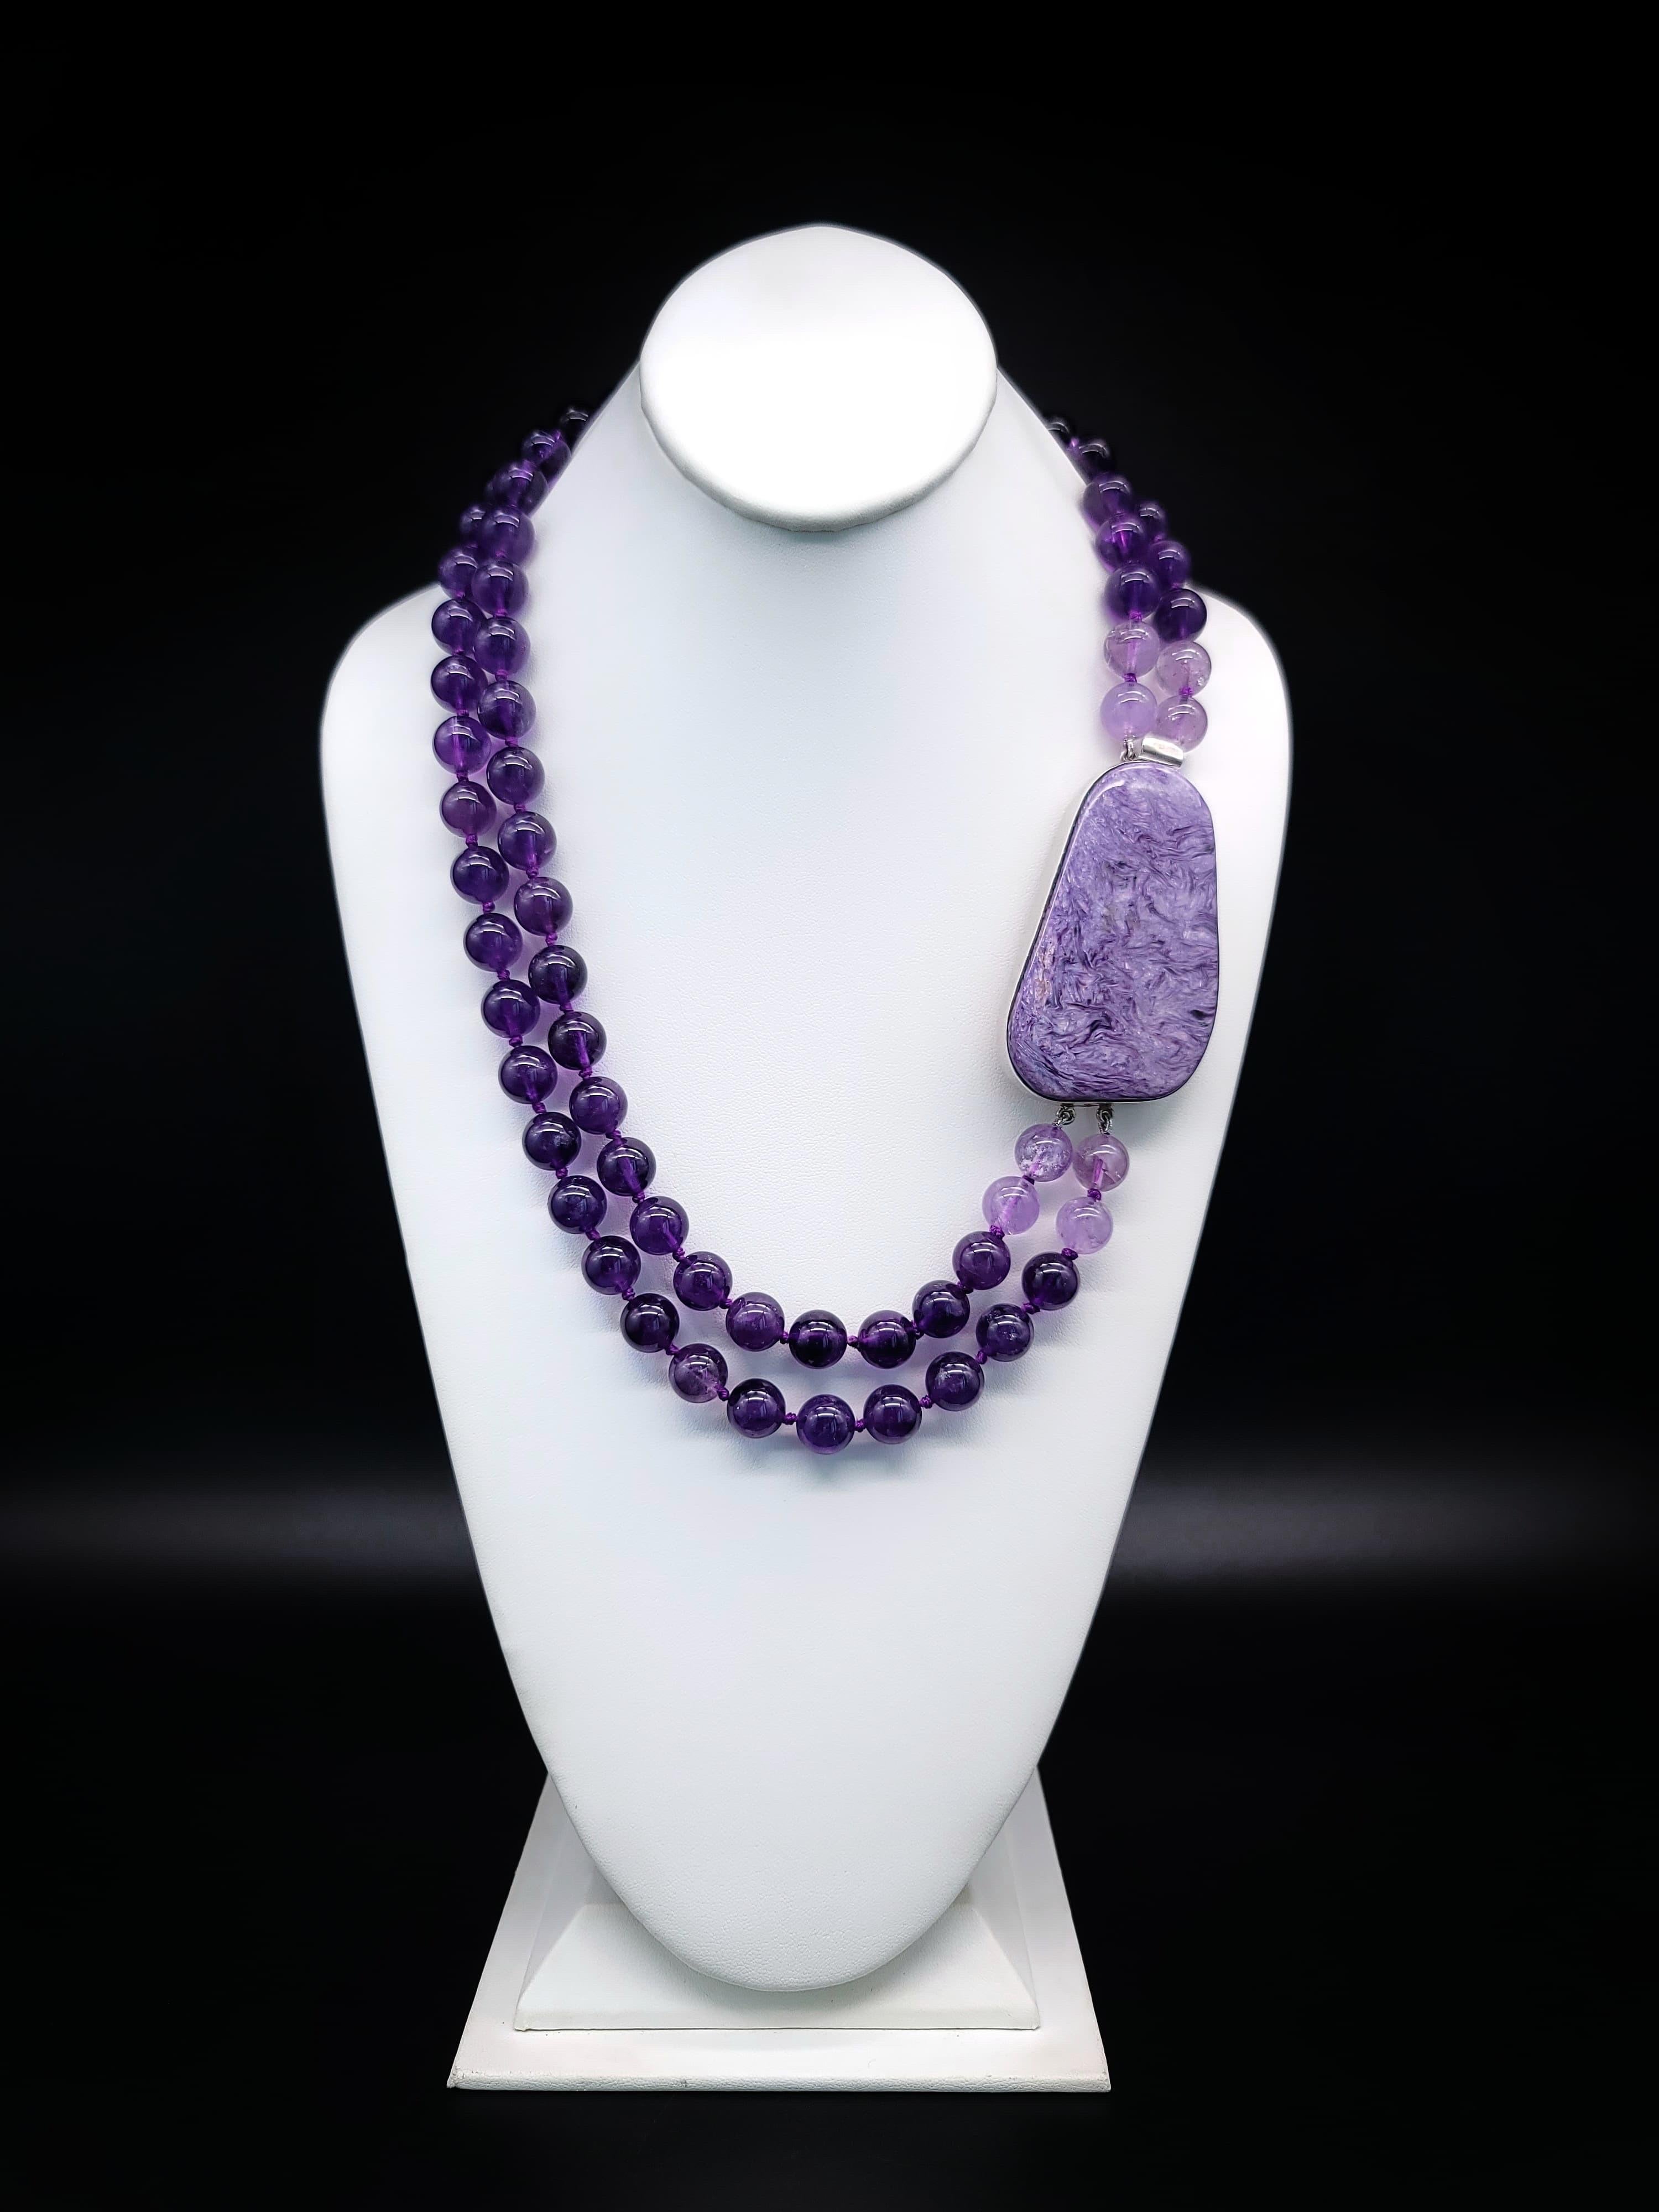 One-of-a-Kind
A 2-strand Matinee length necklace of matched deep purple Amethyst.
The centerpiece of this necklace is the large 3”x2 “ Charoite stone meant to be worn as a side clasp. This gemstone is known for its rareness and is only found in one